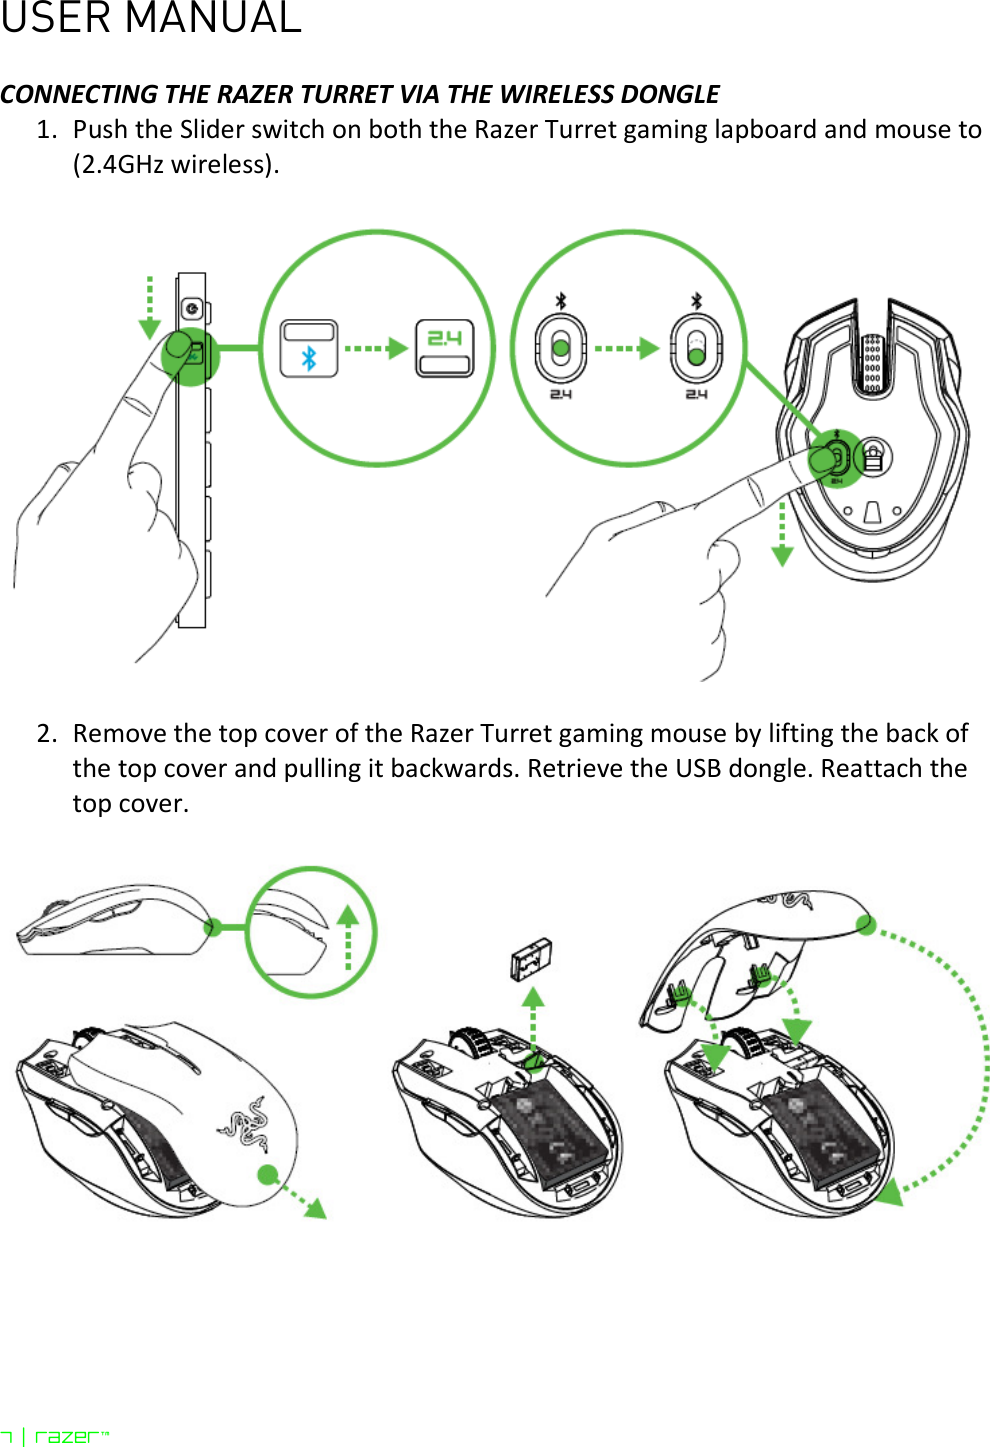 USER MANUAL 7 | razer™  CONNECTING THE RAZER TURRET VIA THE WIRELESS DONGLE 1. Push the Slider switch on both the Razer Turret gaming lapboard and mouse to (2.4GHz wireless).    2. Remove the top cover of the Razer Turret gaming mouse by lifting the back of the top cover and pulling it backwards. Retrieve the USB dongle. Reattach the top cover.    